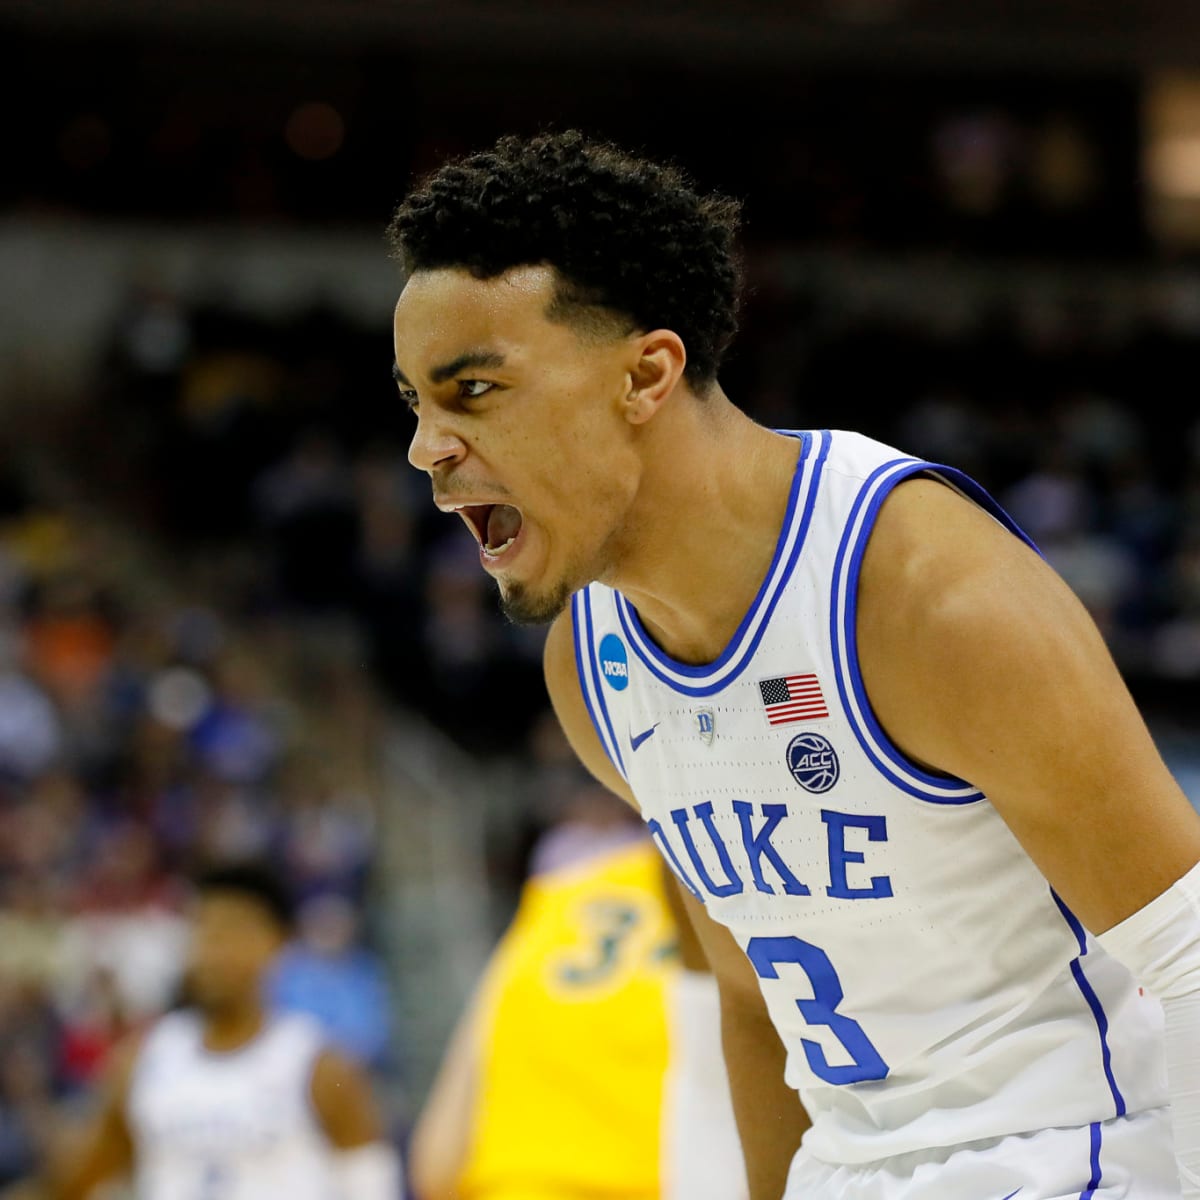 5-star guard Tre Jones emerges from brother's shadow into top